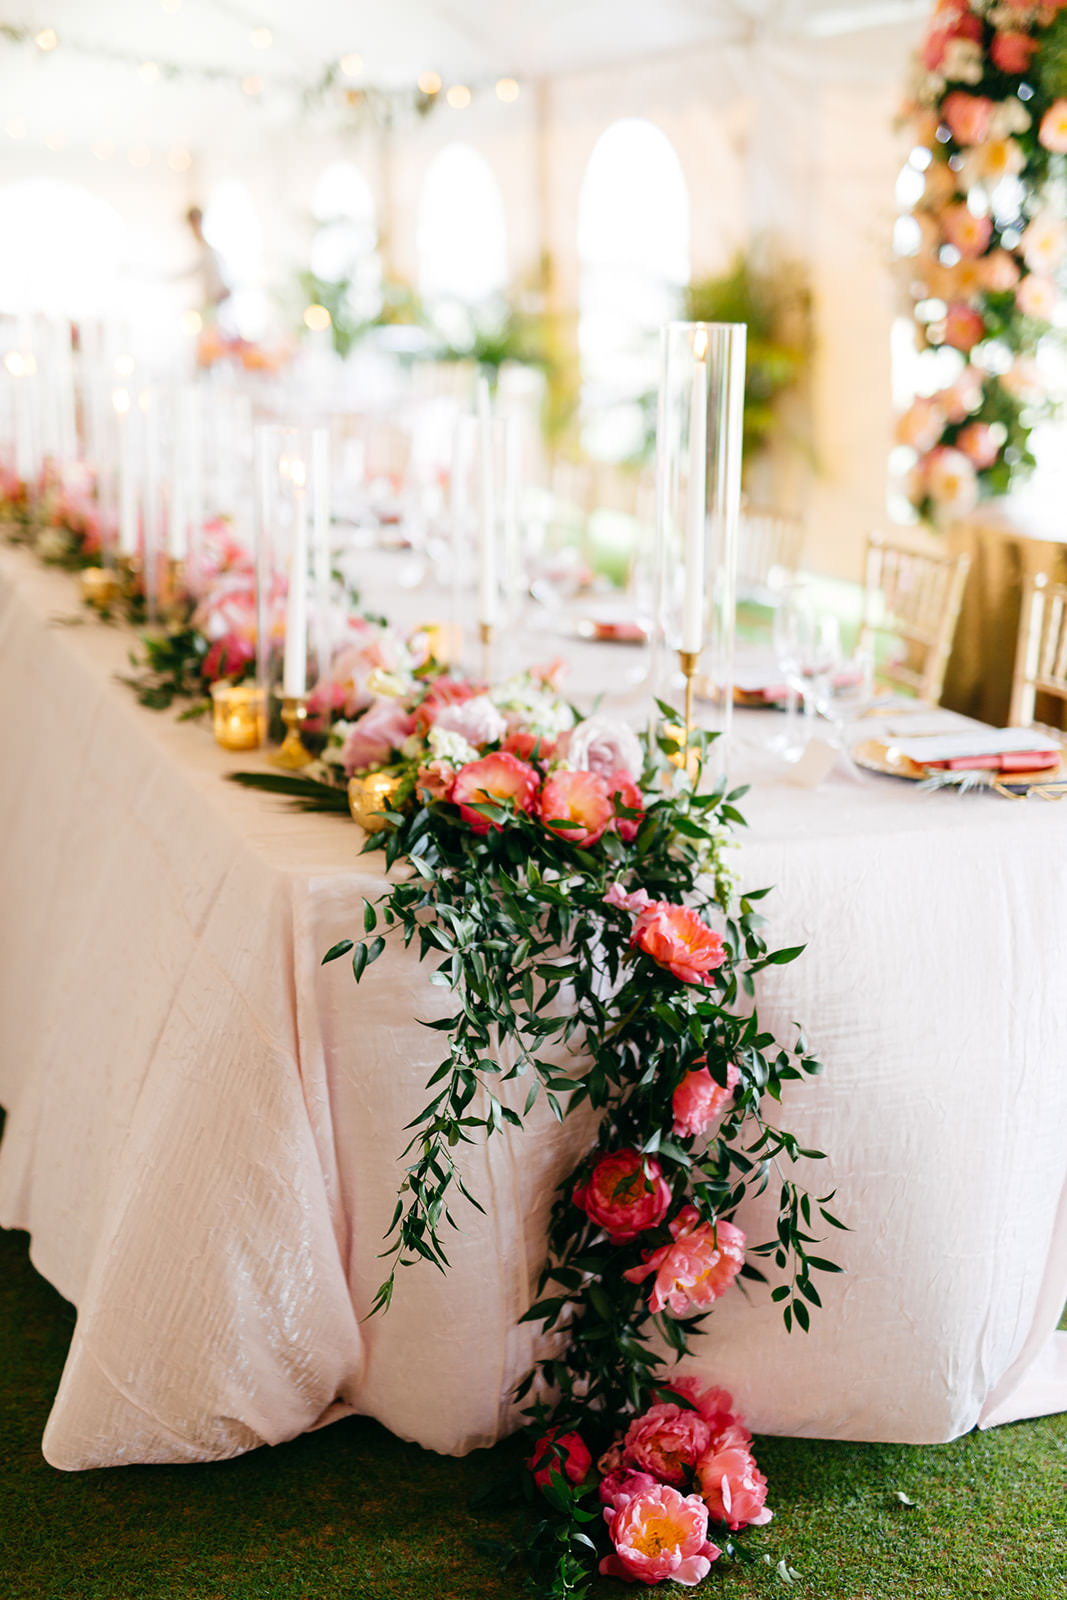 Elegant Tropical Wedding Reception Decor, Lush Pink and Coral with Greenery Floral Table Runner, Gold Candlesticks | Tampa Bay Wedding Planner Nk Weddings